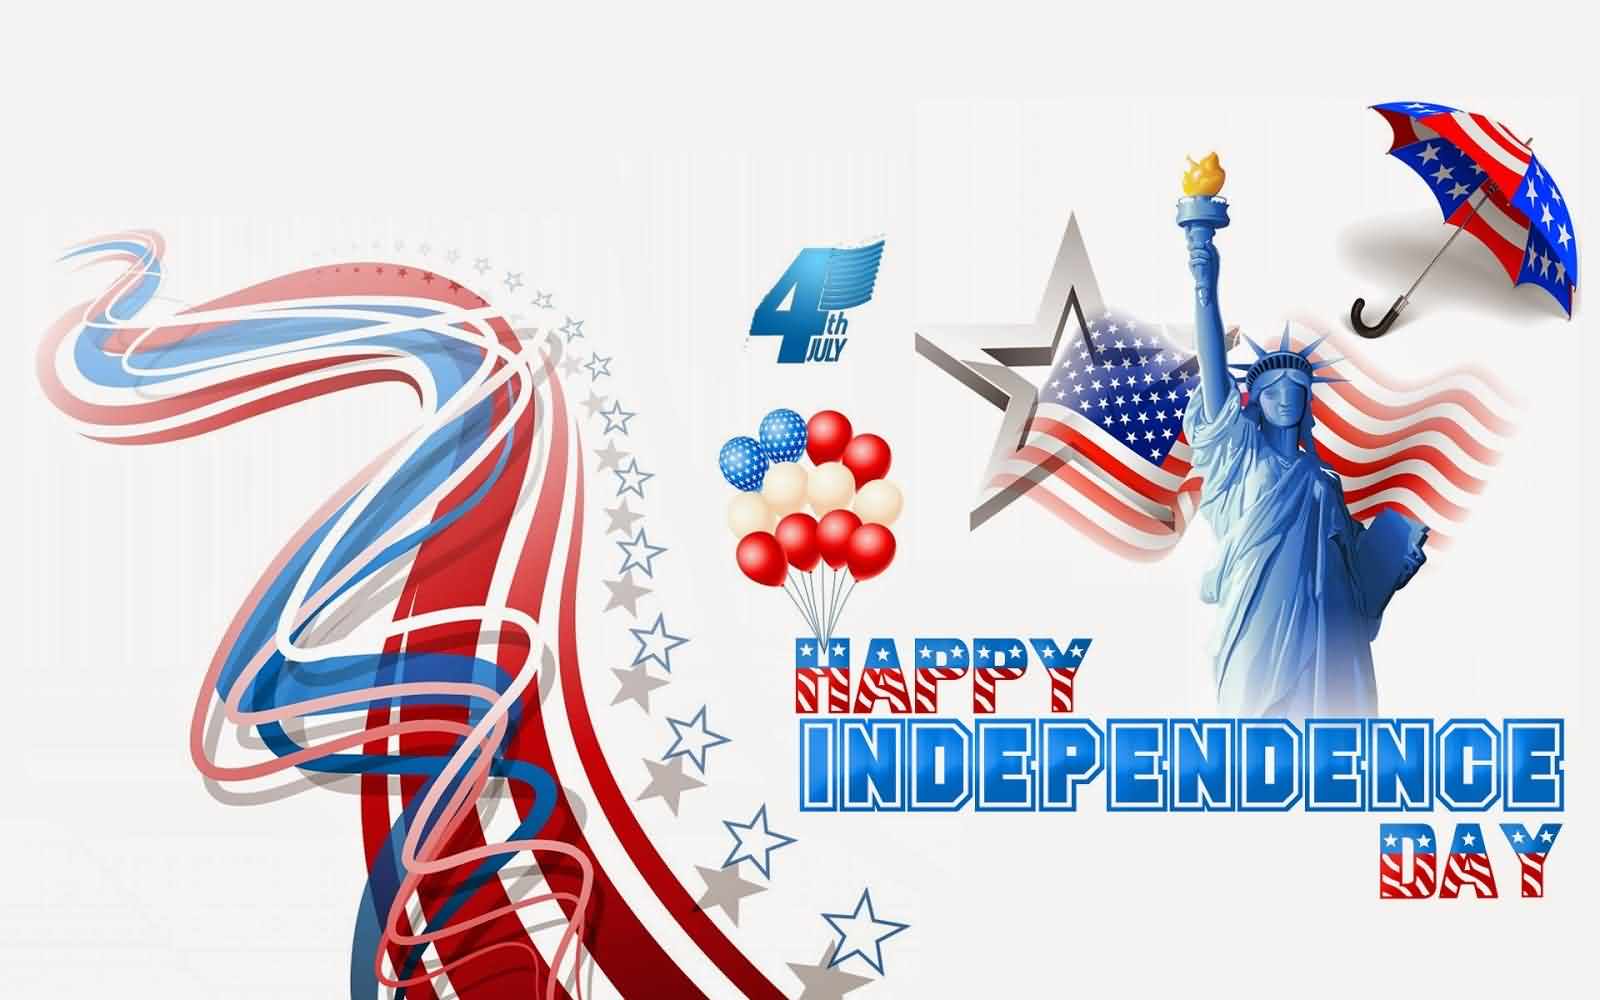 4th July Celebrations Wish You Very Happy Independence Day Wishes Message Image